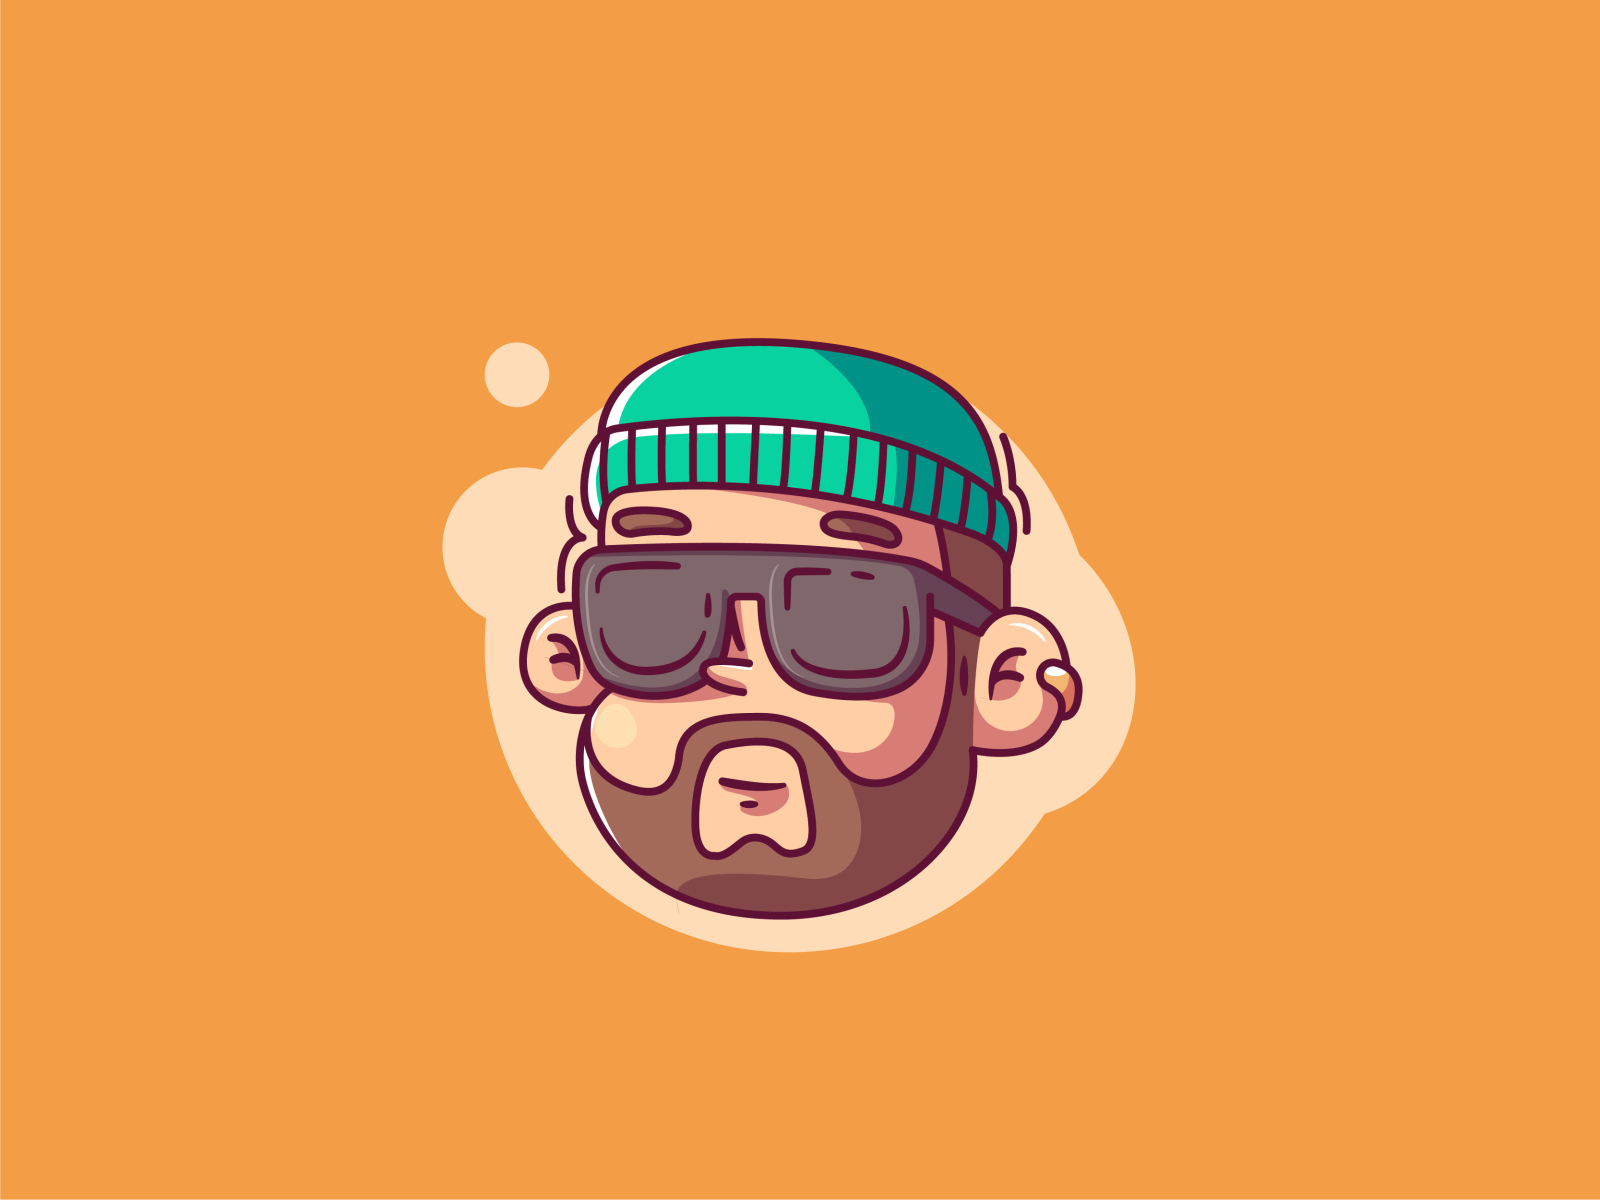 Little face character by Dony ilica on Dribbble